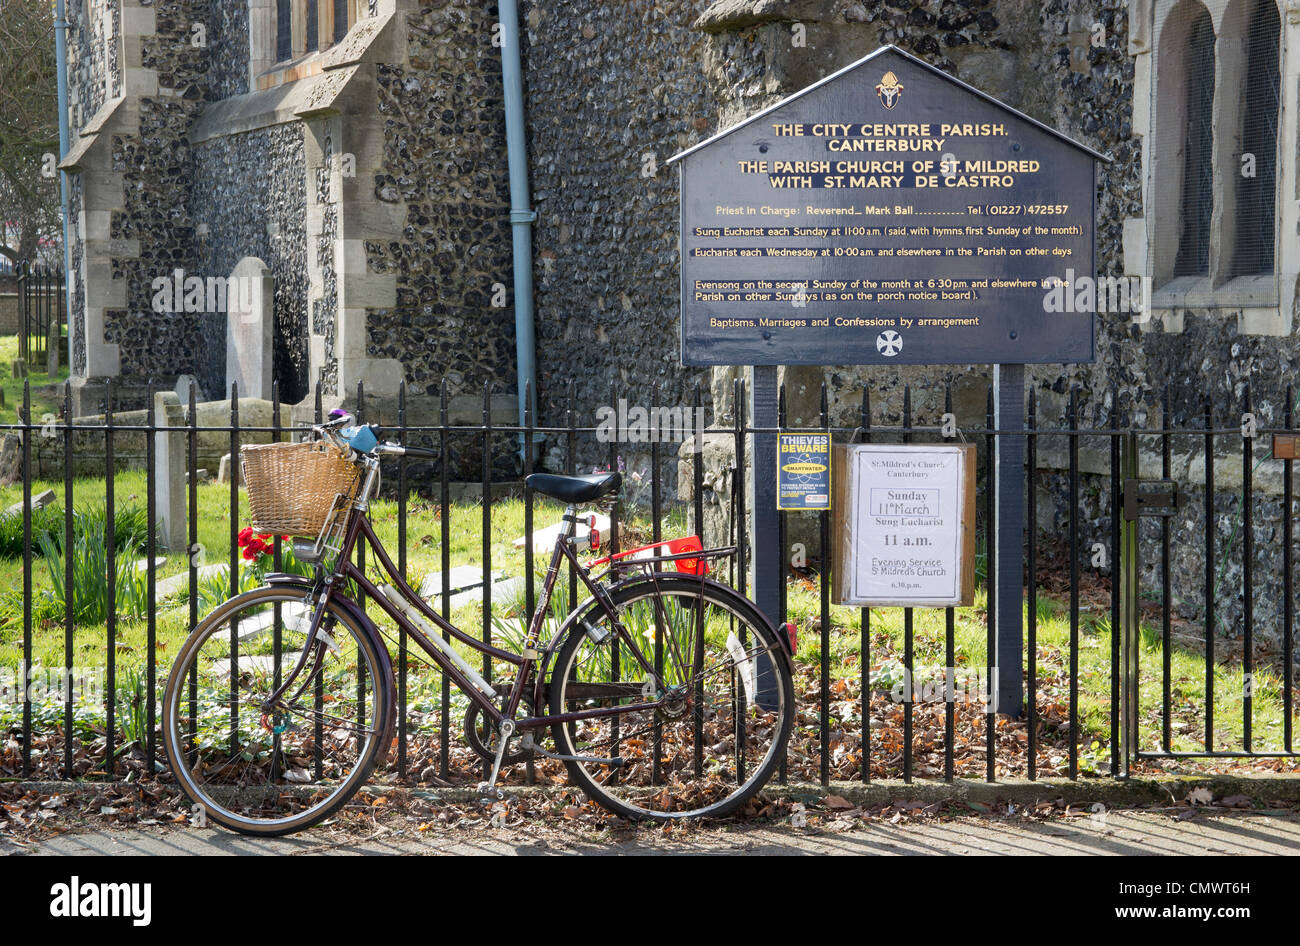 Church flower arranger Ladies bicycle with basket outside church. Stock Photo